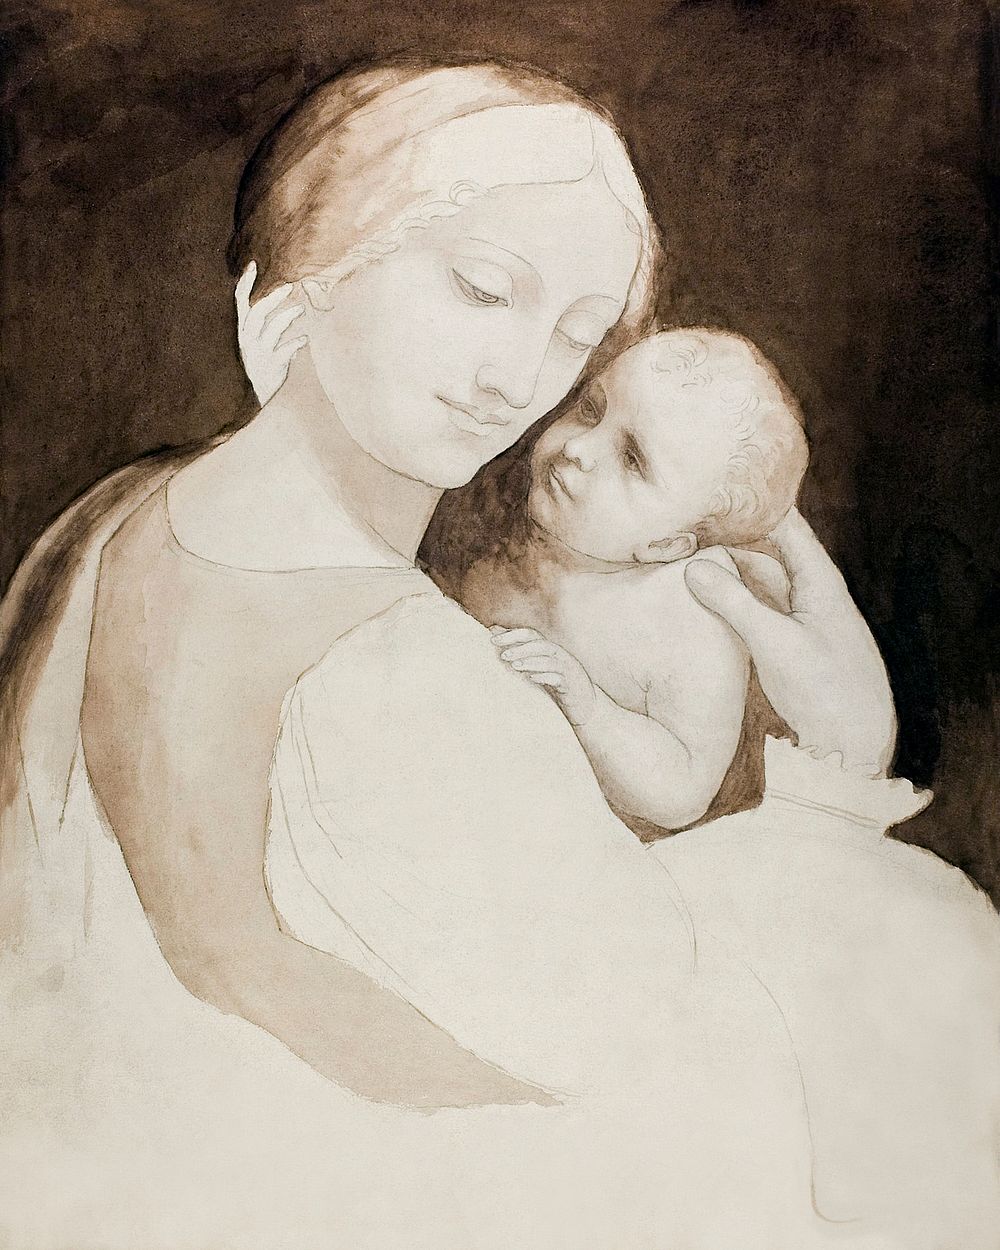 Madonna and Child, and Fragment of Woman&rsquo;s Torso (1800&ndash;1825) by Leonardo da Vinci. Original from The Art…